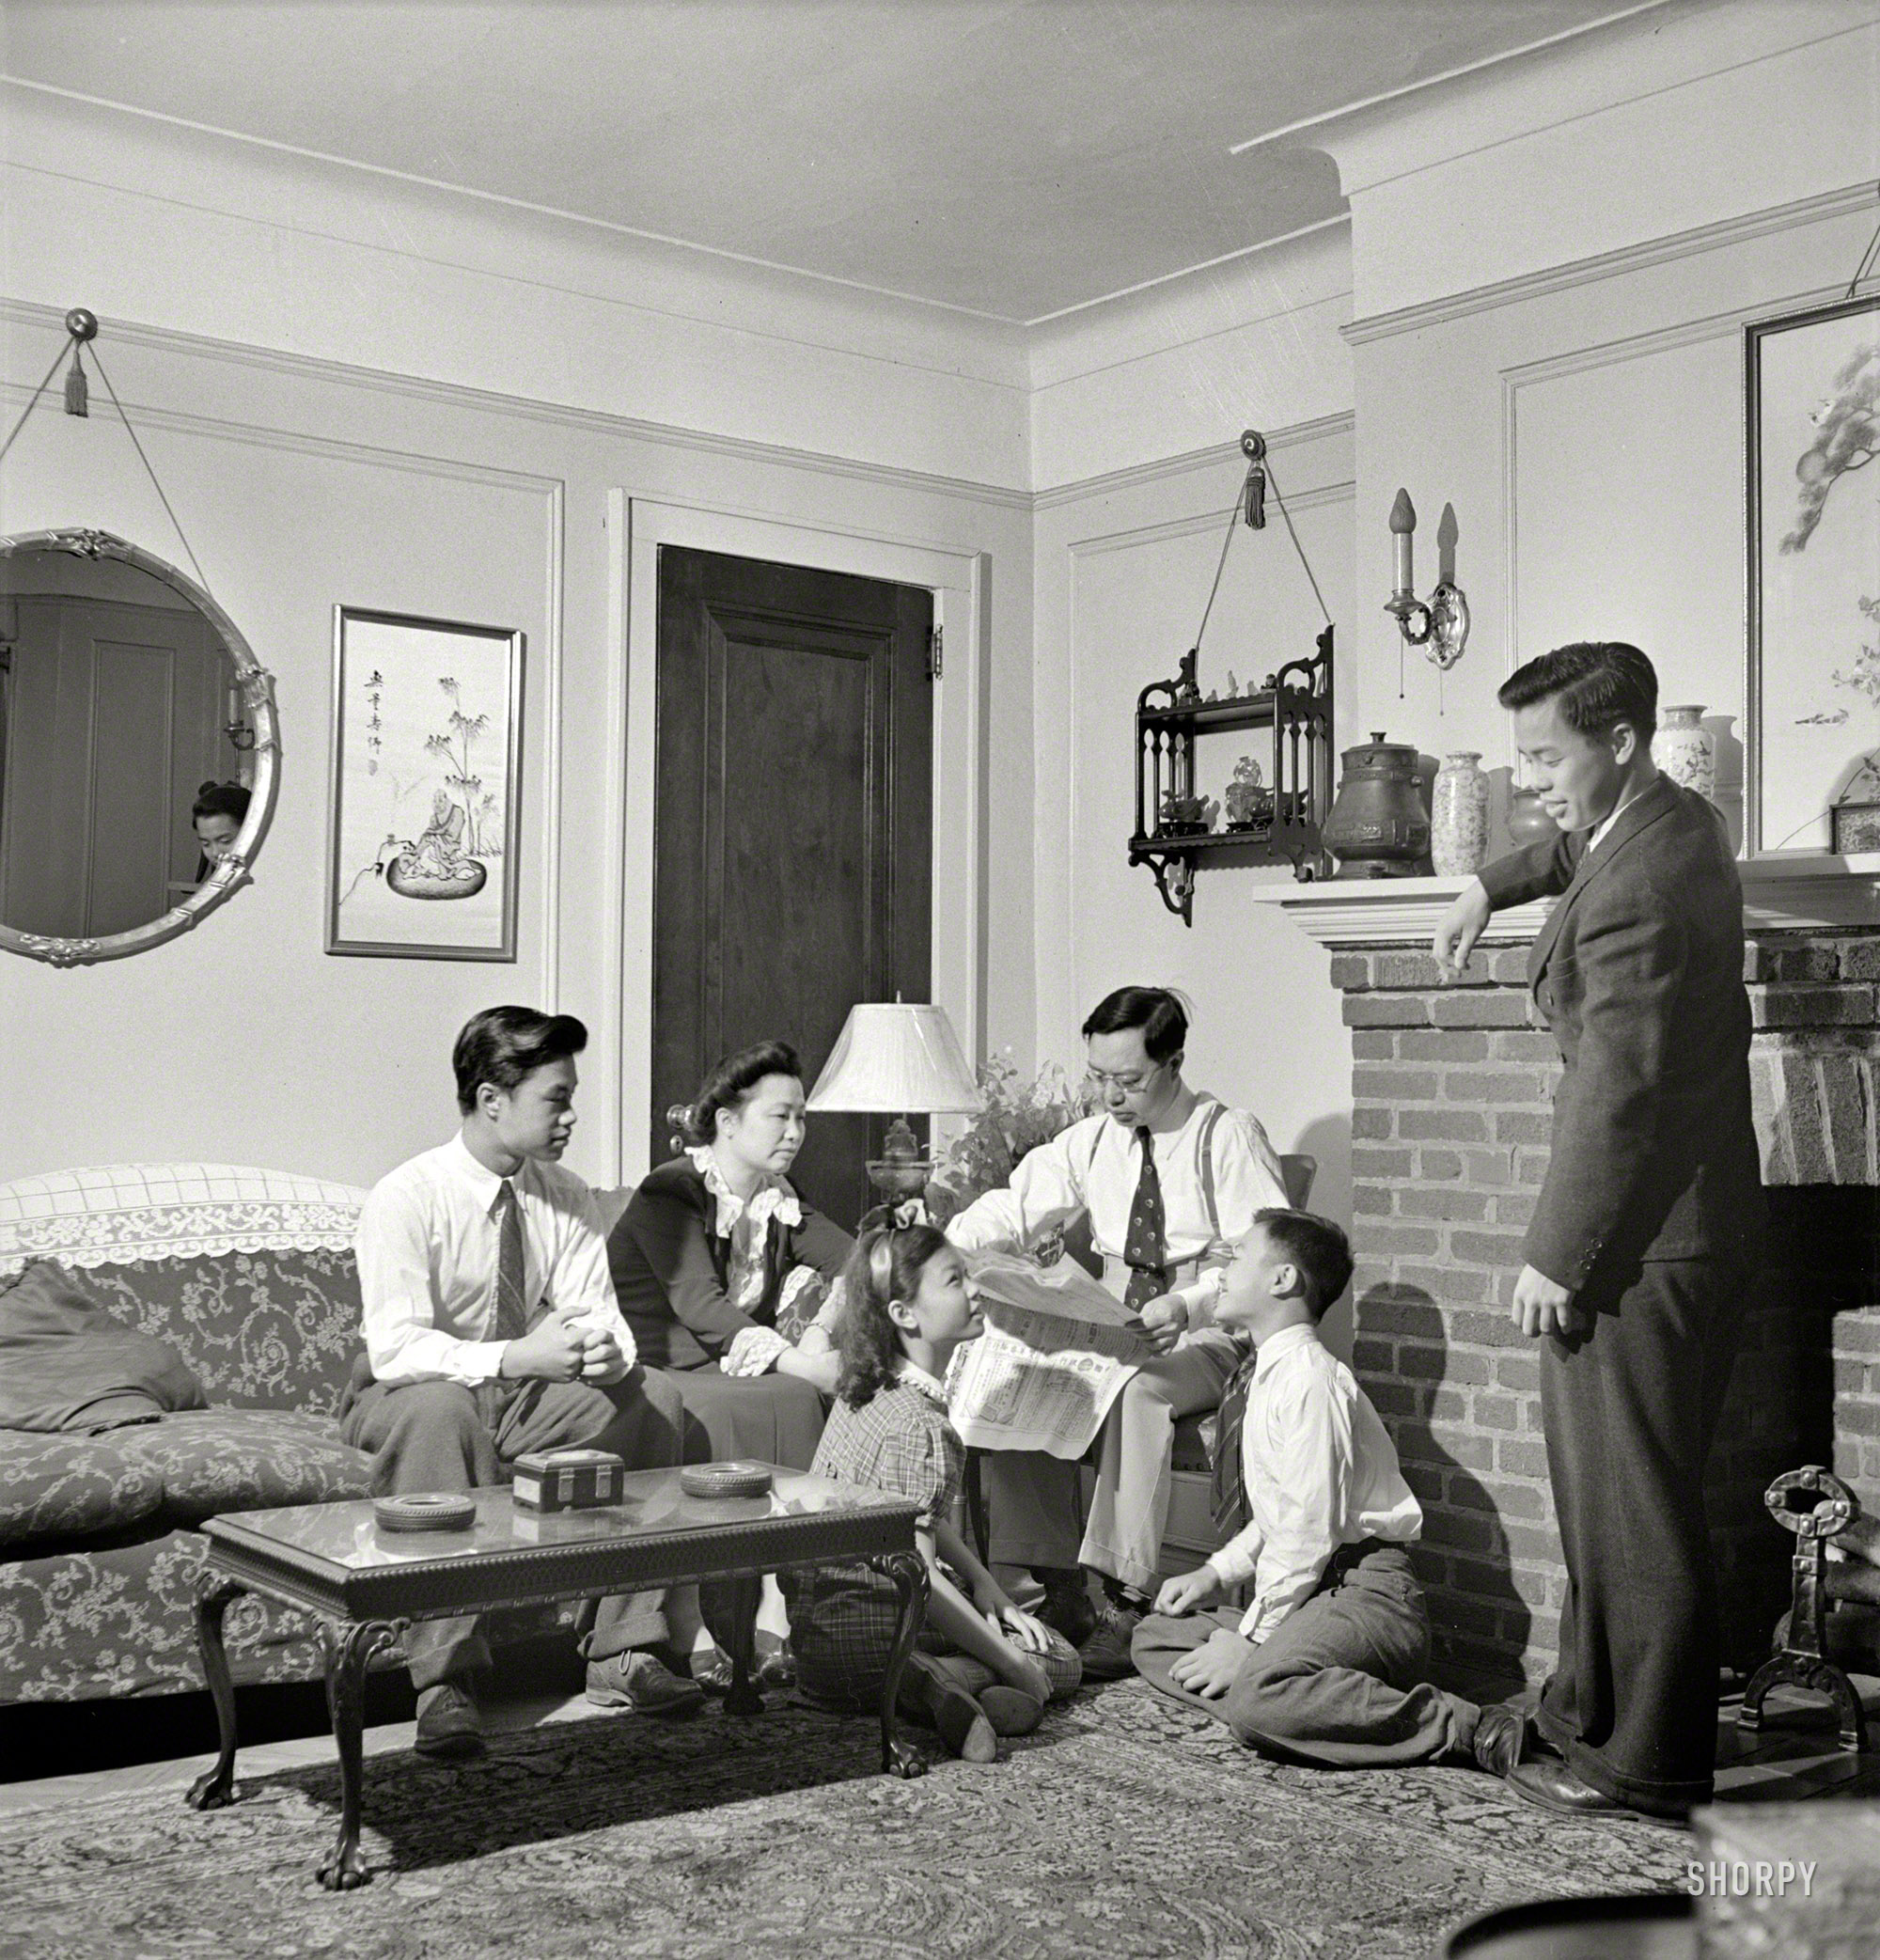 August 1942. "New York. Chinese-American family in their home in Flatbush." Back in Brooklyn with the boy we saw earlier here. Medium-format nitrate negative by Marjory Collins, Office of War Information. View full size.